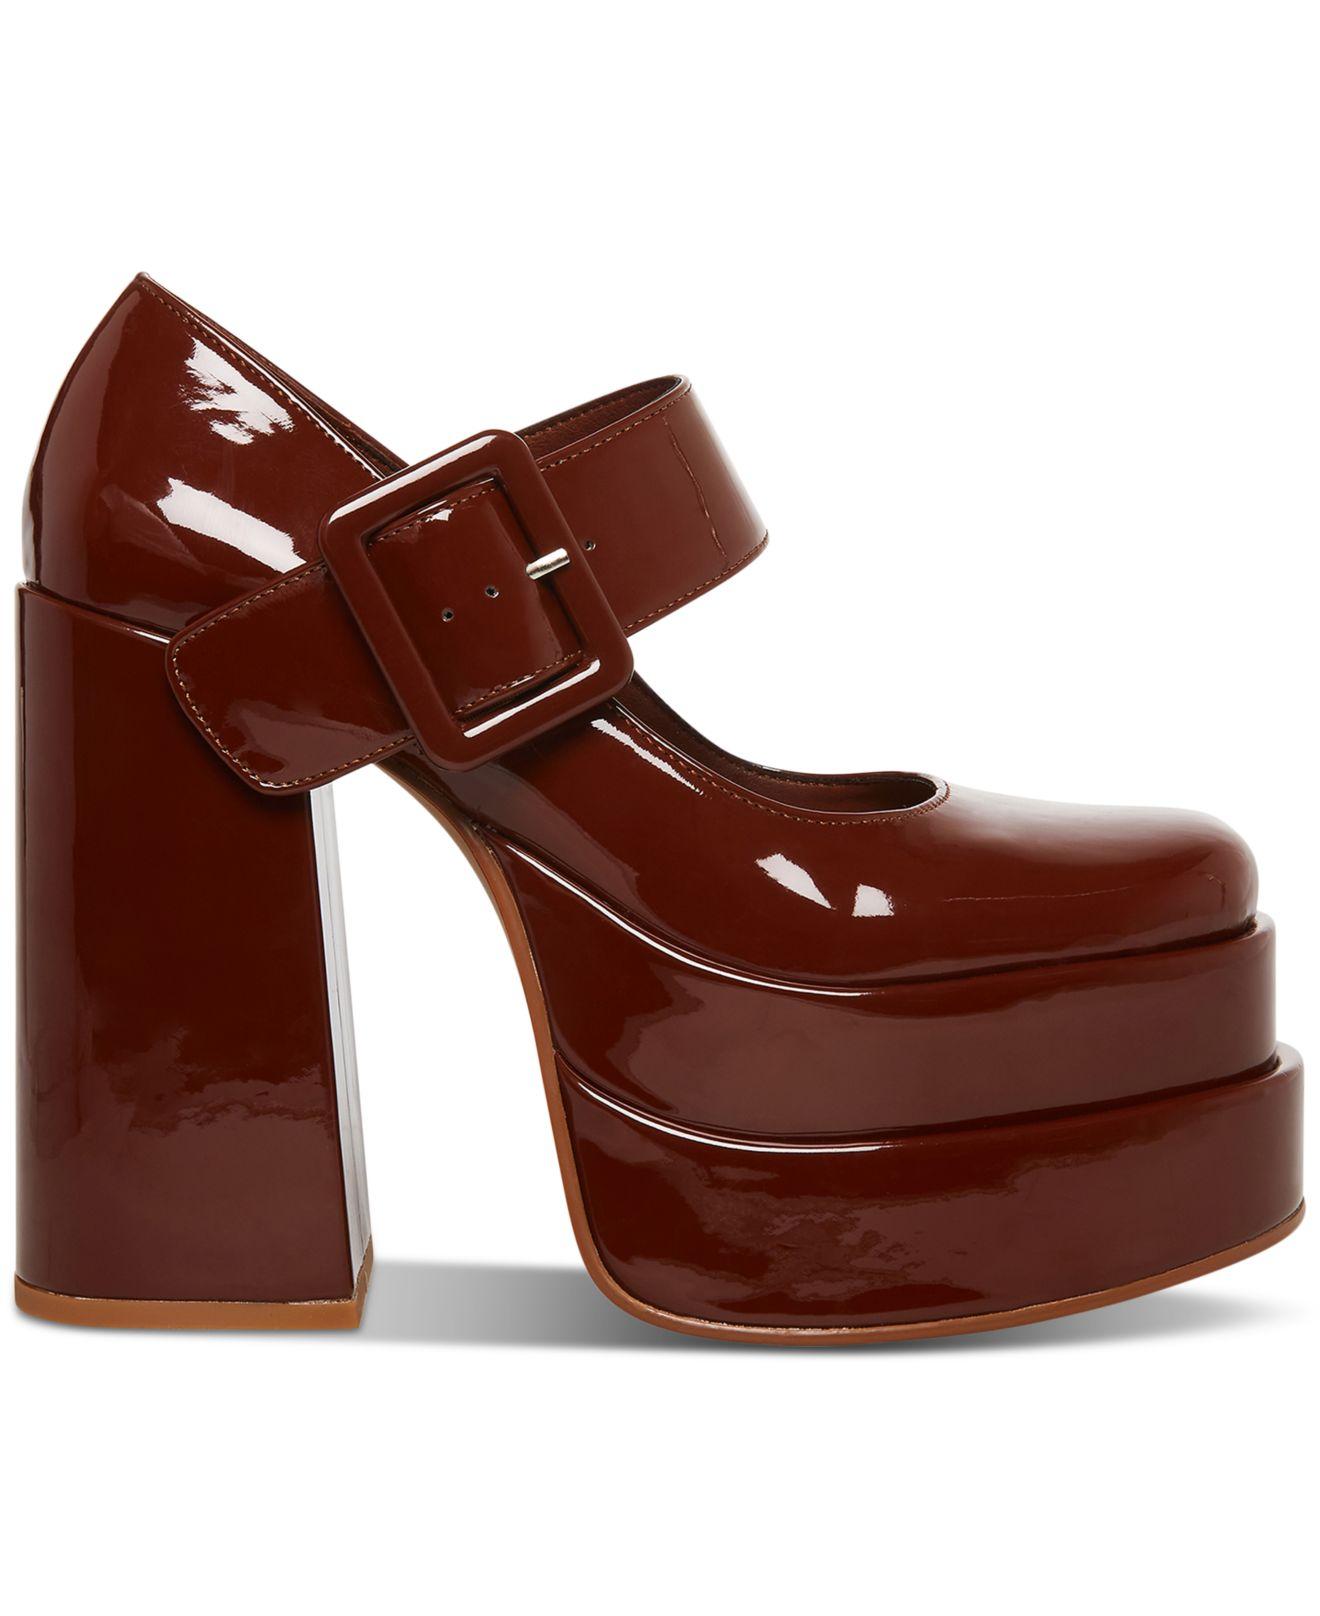 Steve Madden Carly Double Platform Mary Jane Pumps in Brown | Lyst